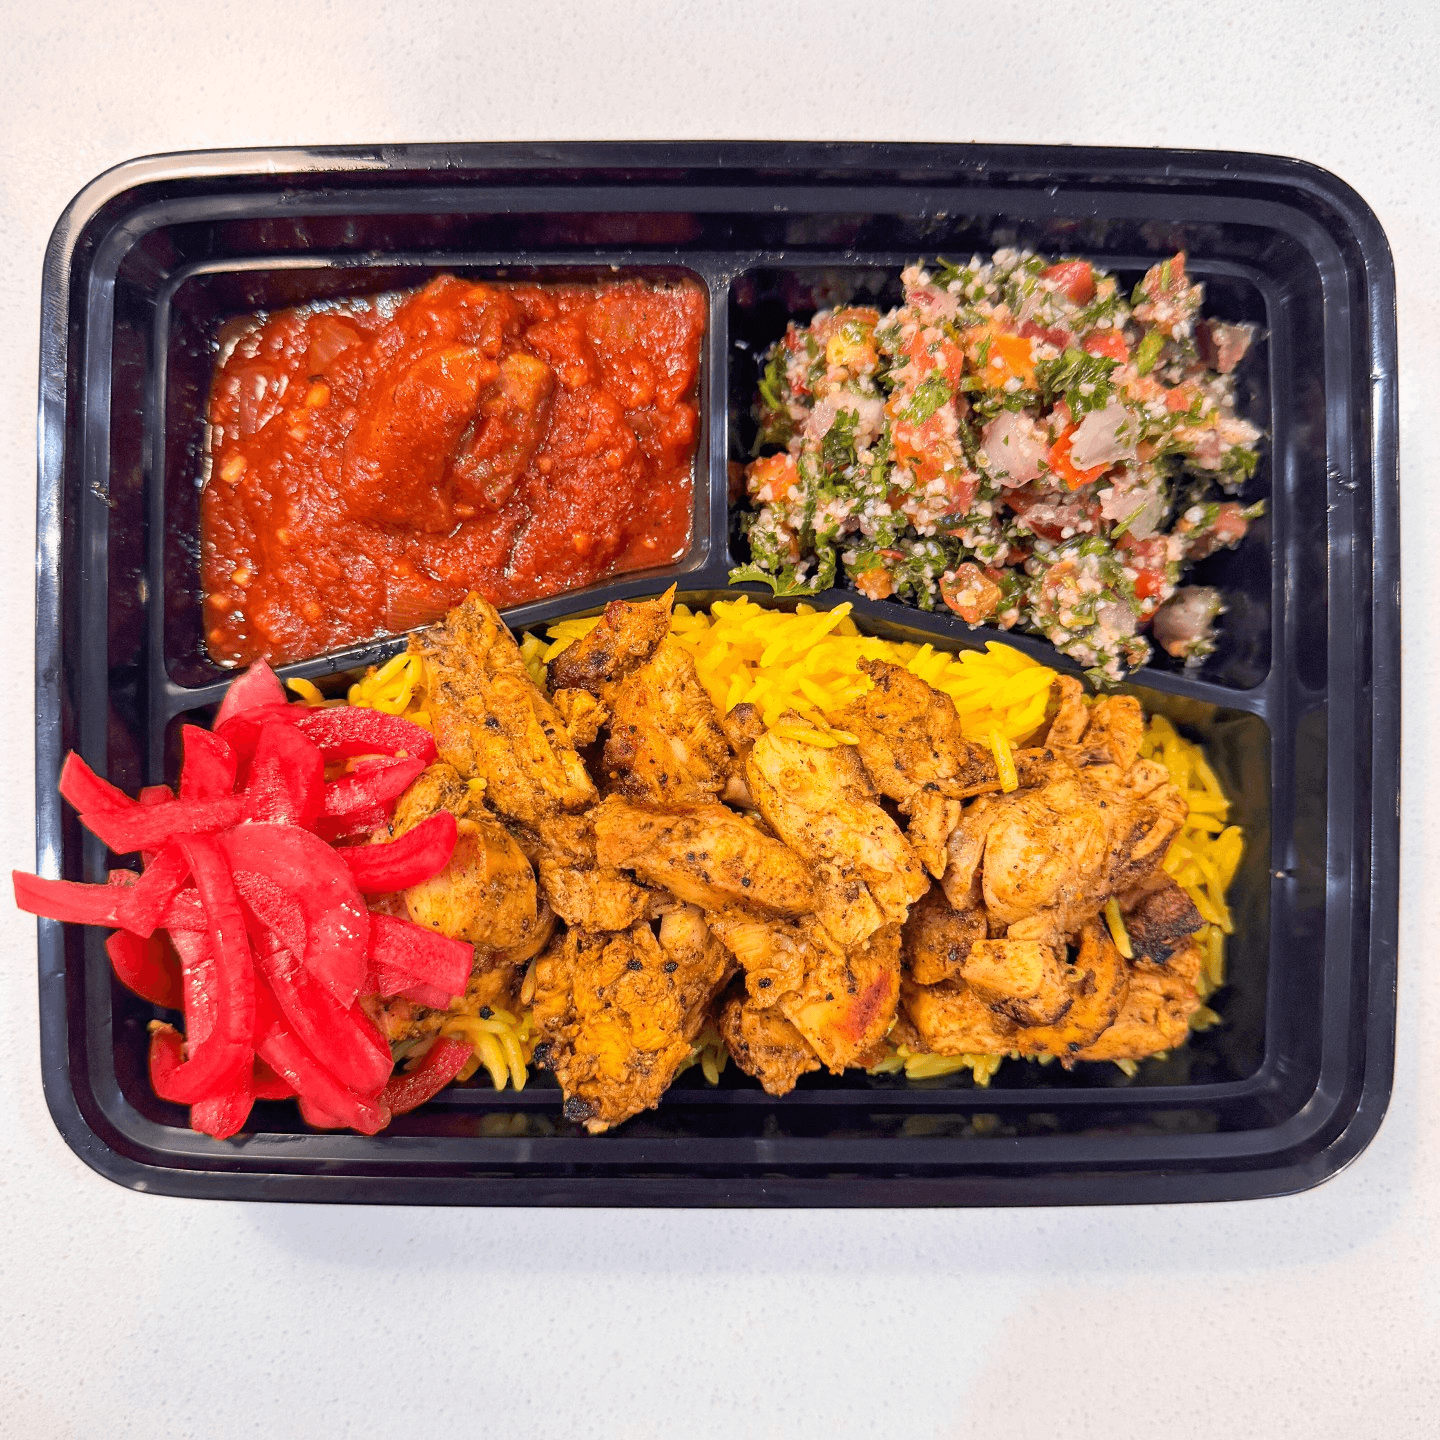 What Makes Our Grilled Chicken Platter a Must-Try?